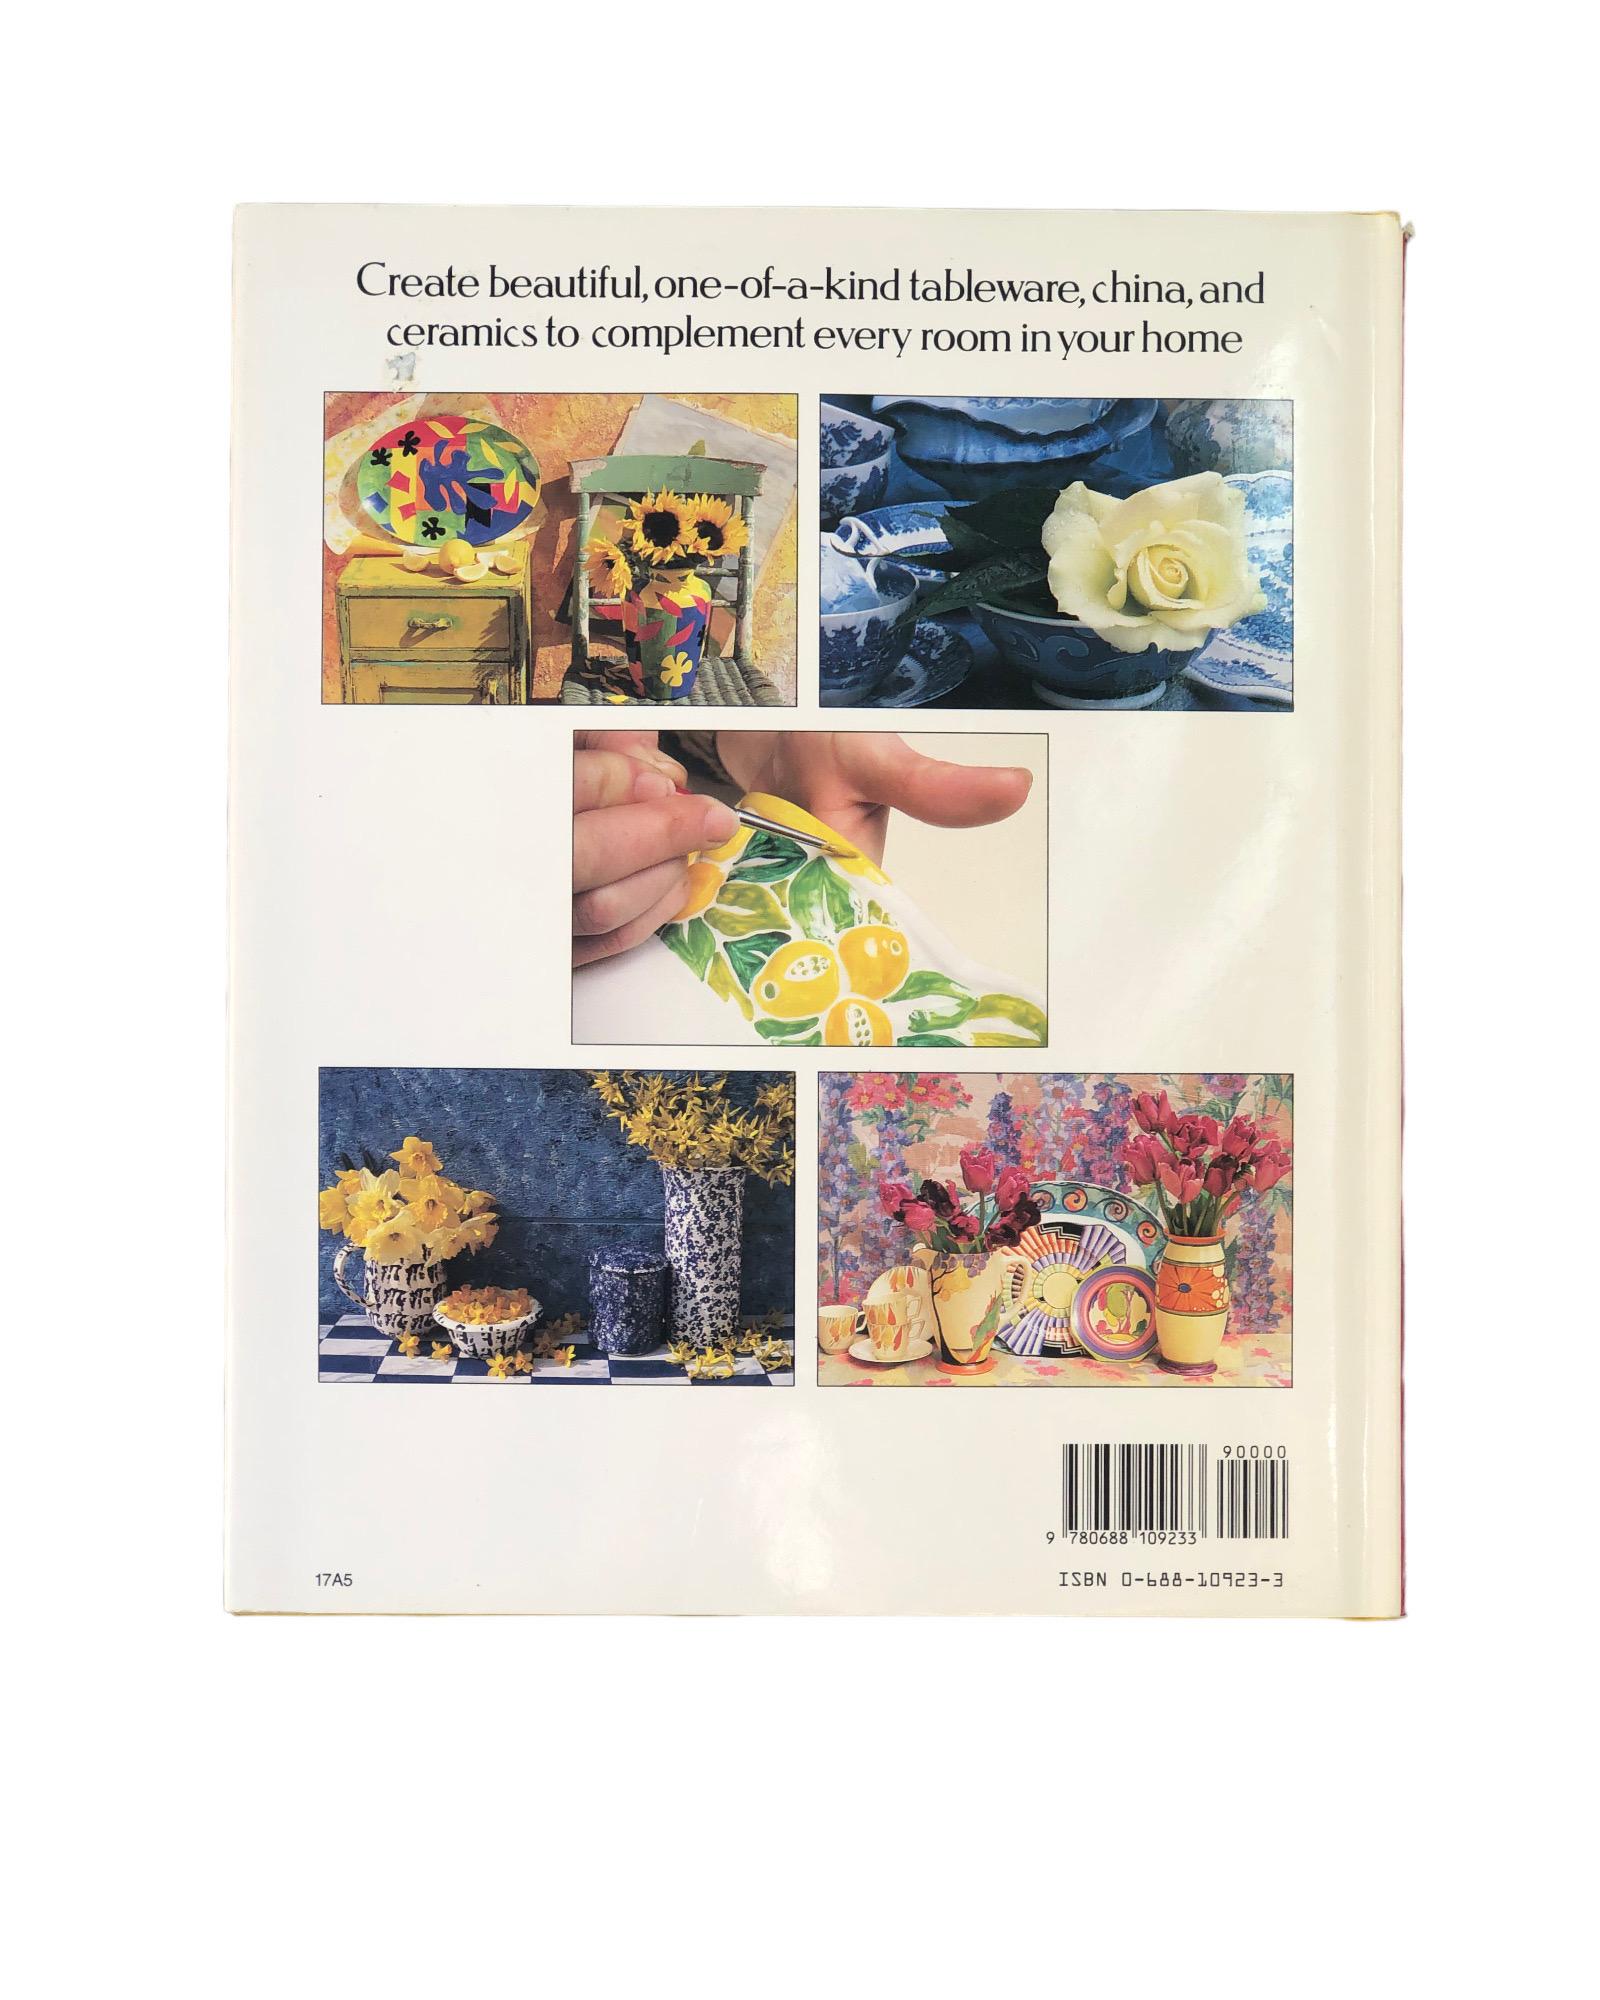 Designer China - the Fine Art of Ceramic Painting Made Simple by Lesley Harle with Susan Conder. Hardcover book with dustjacket. Stated first edition published in 1991 by William Morrow and Company of New York. Printed and bound in Hong Kong.